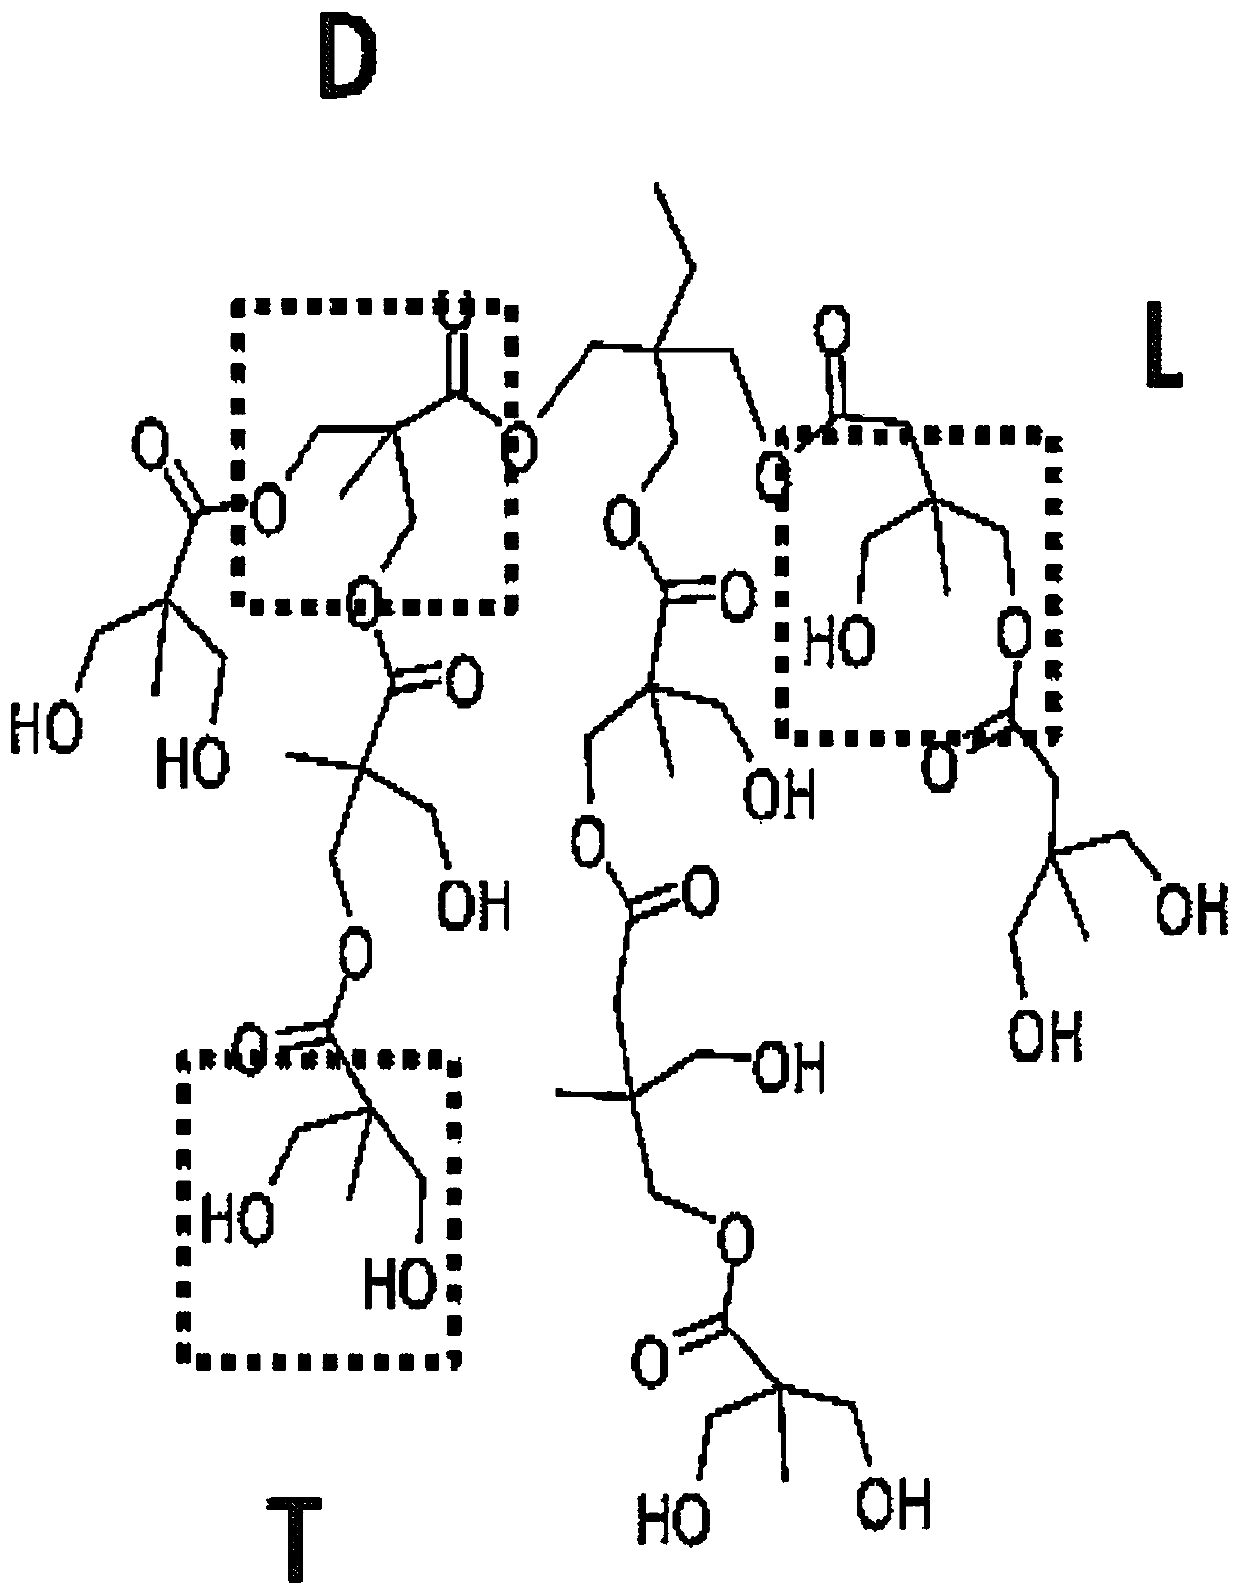 S-nitrosothiol-mediated hyperbranched polyesters